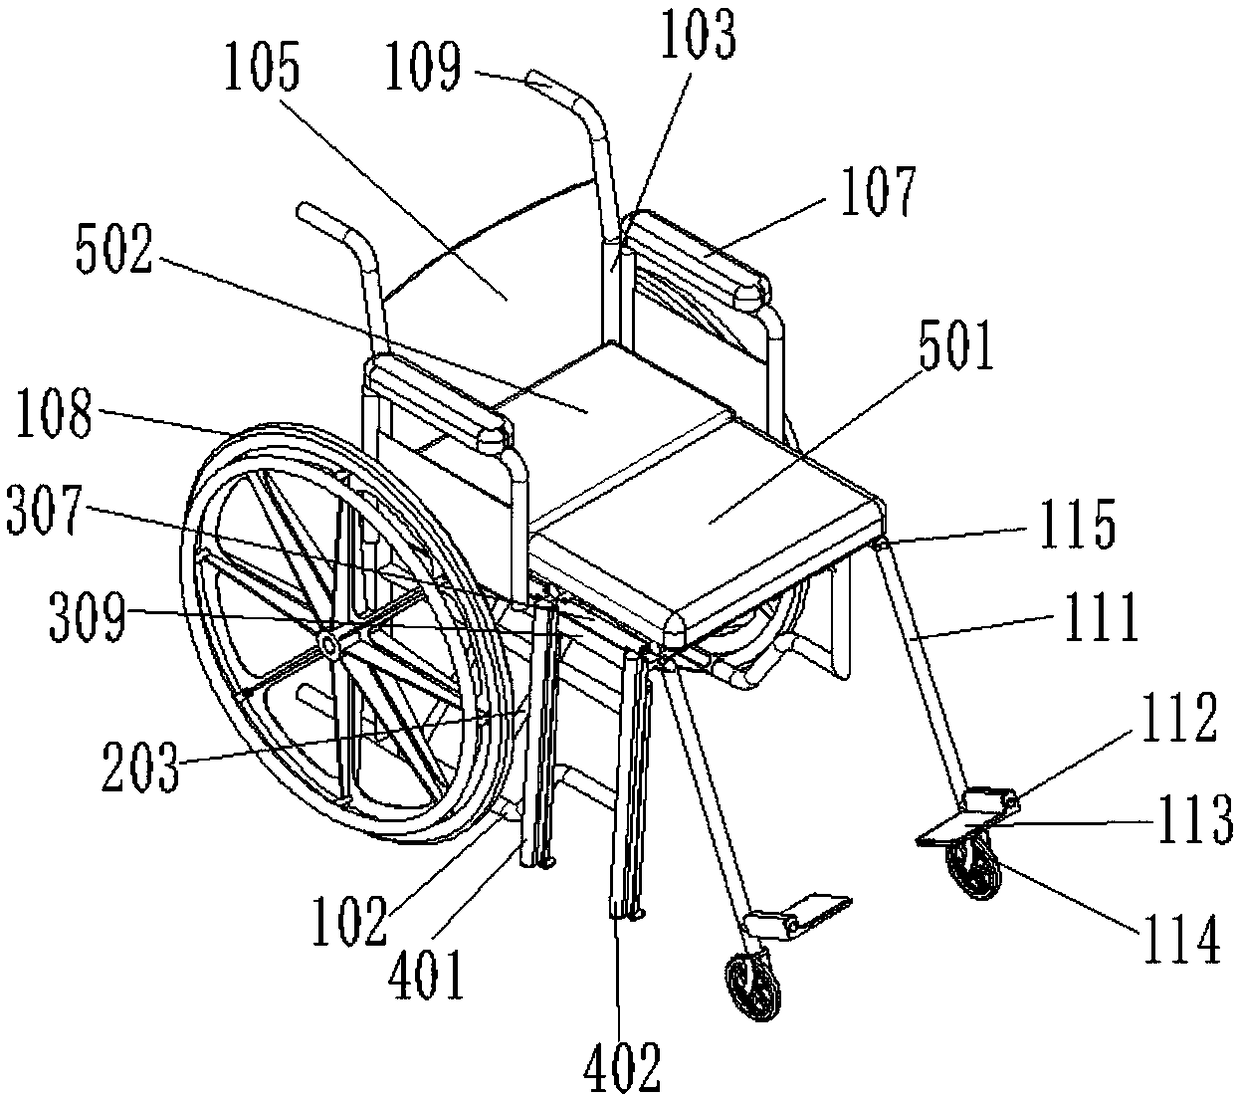 Foldable wheelchair bringing convenience for people to get on or off wheelchair